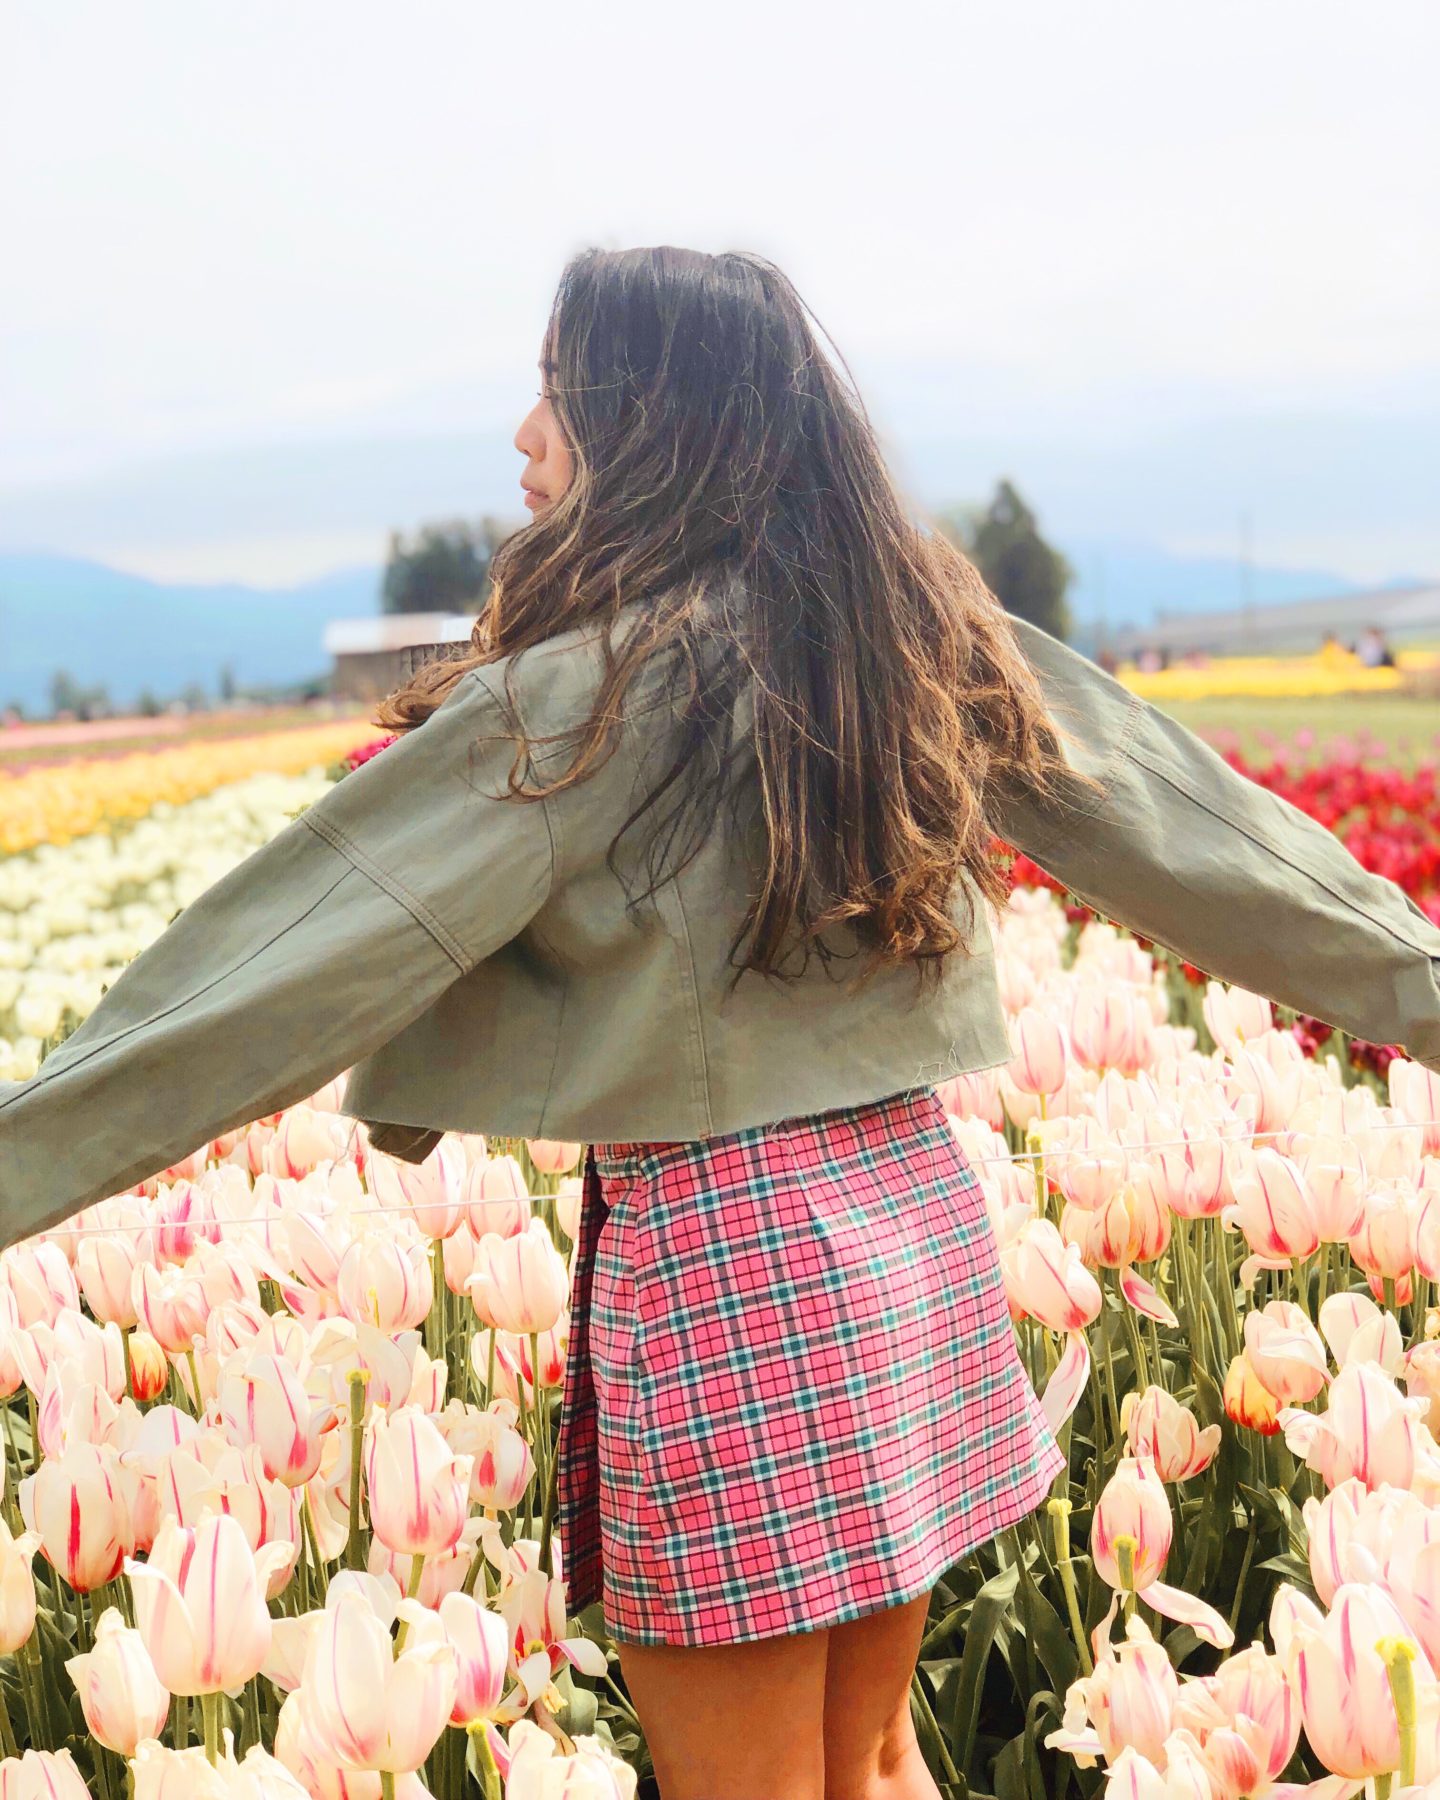 Frolicking in the tulip fields for my 27th birthday 